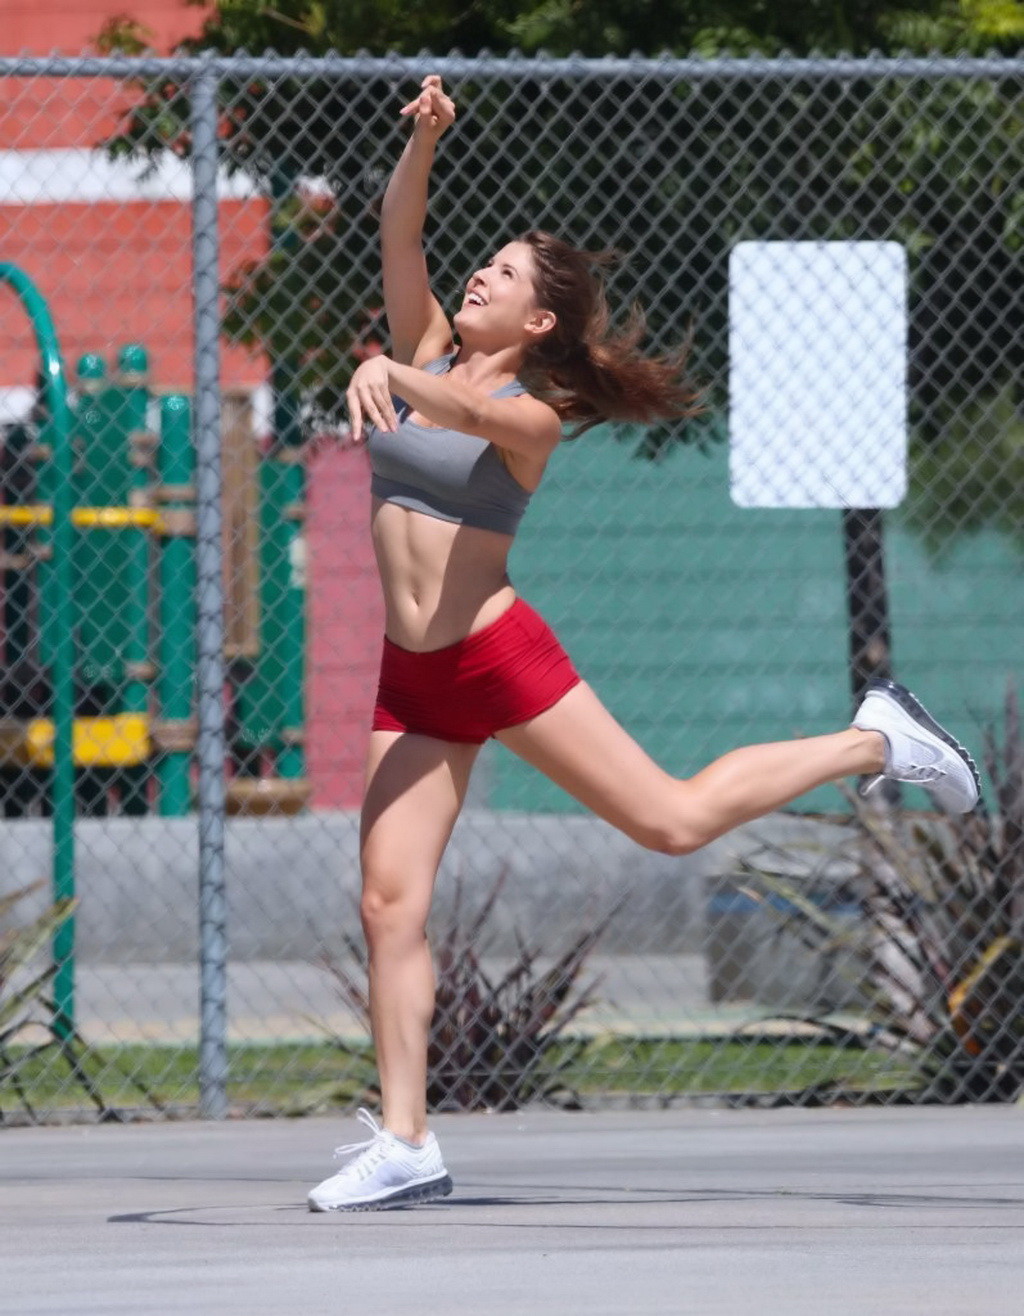 Amanda Cerny busty showing her pokies and ass while plays basketball in Beverly  #75187929